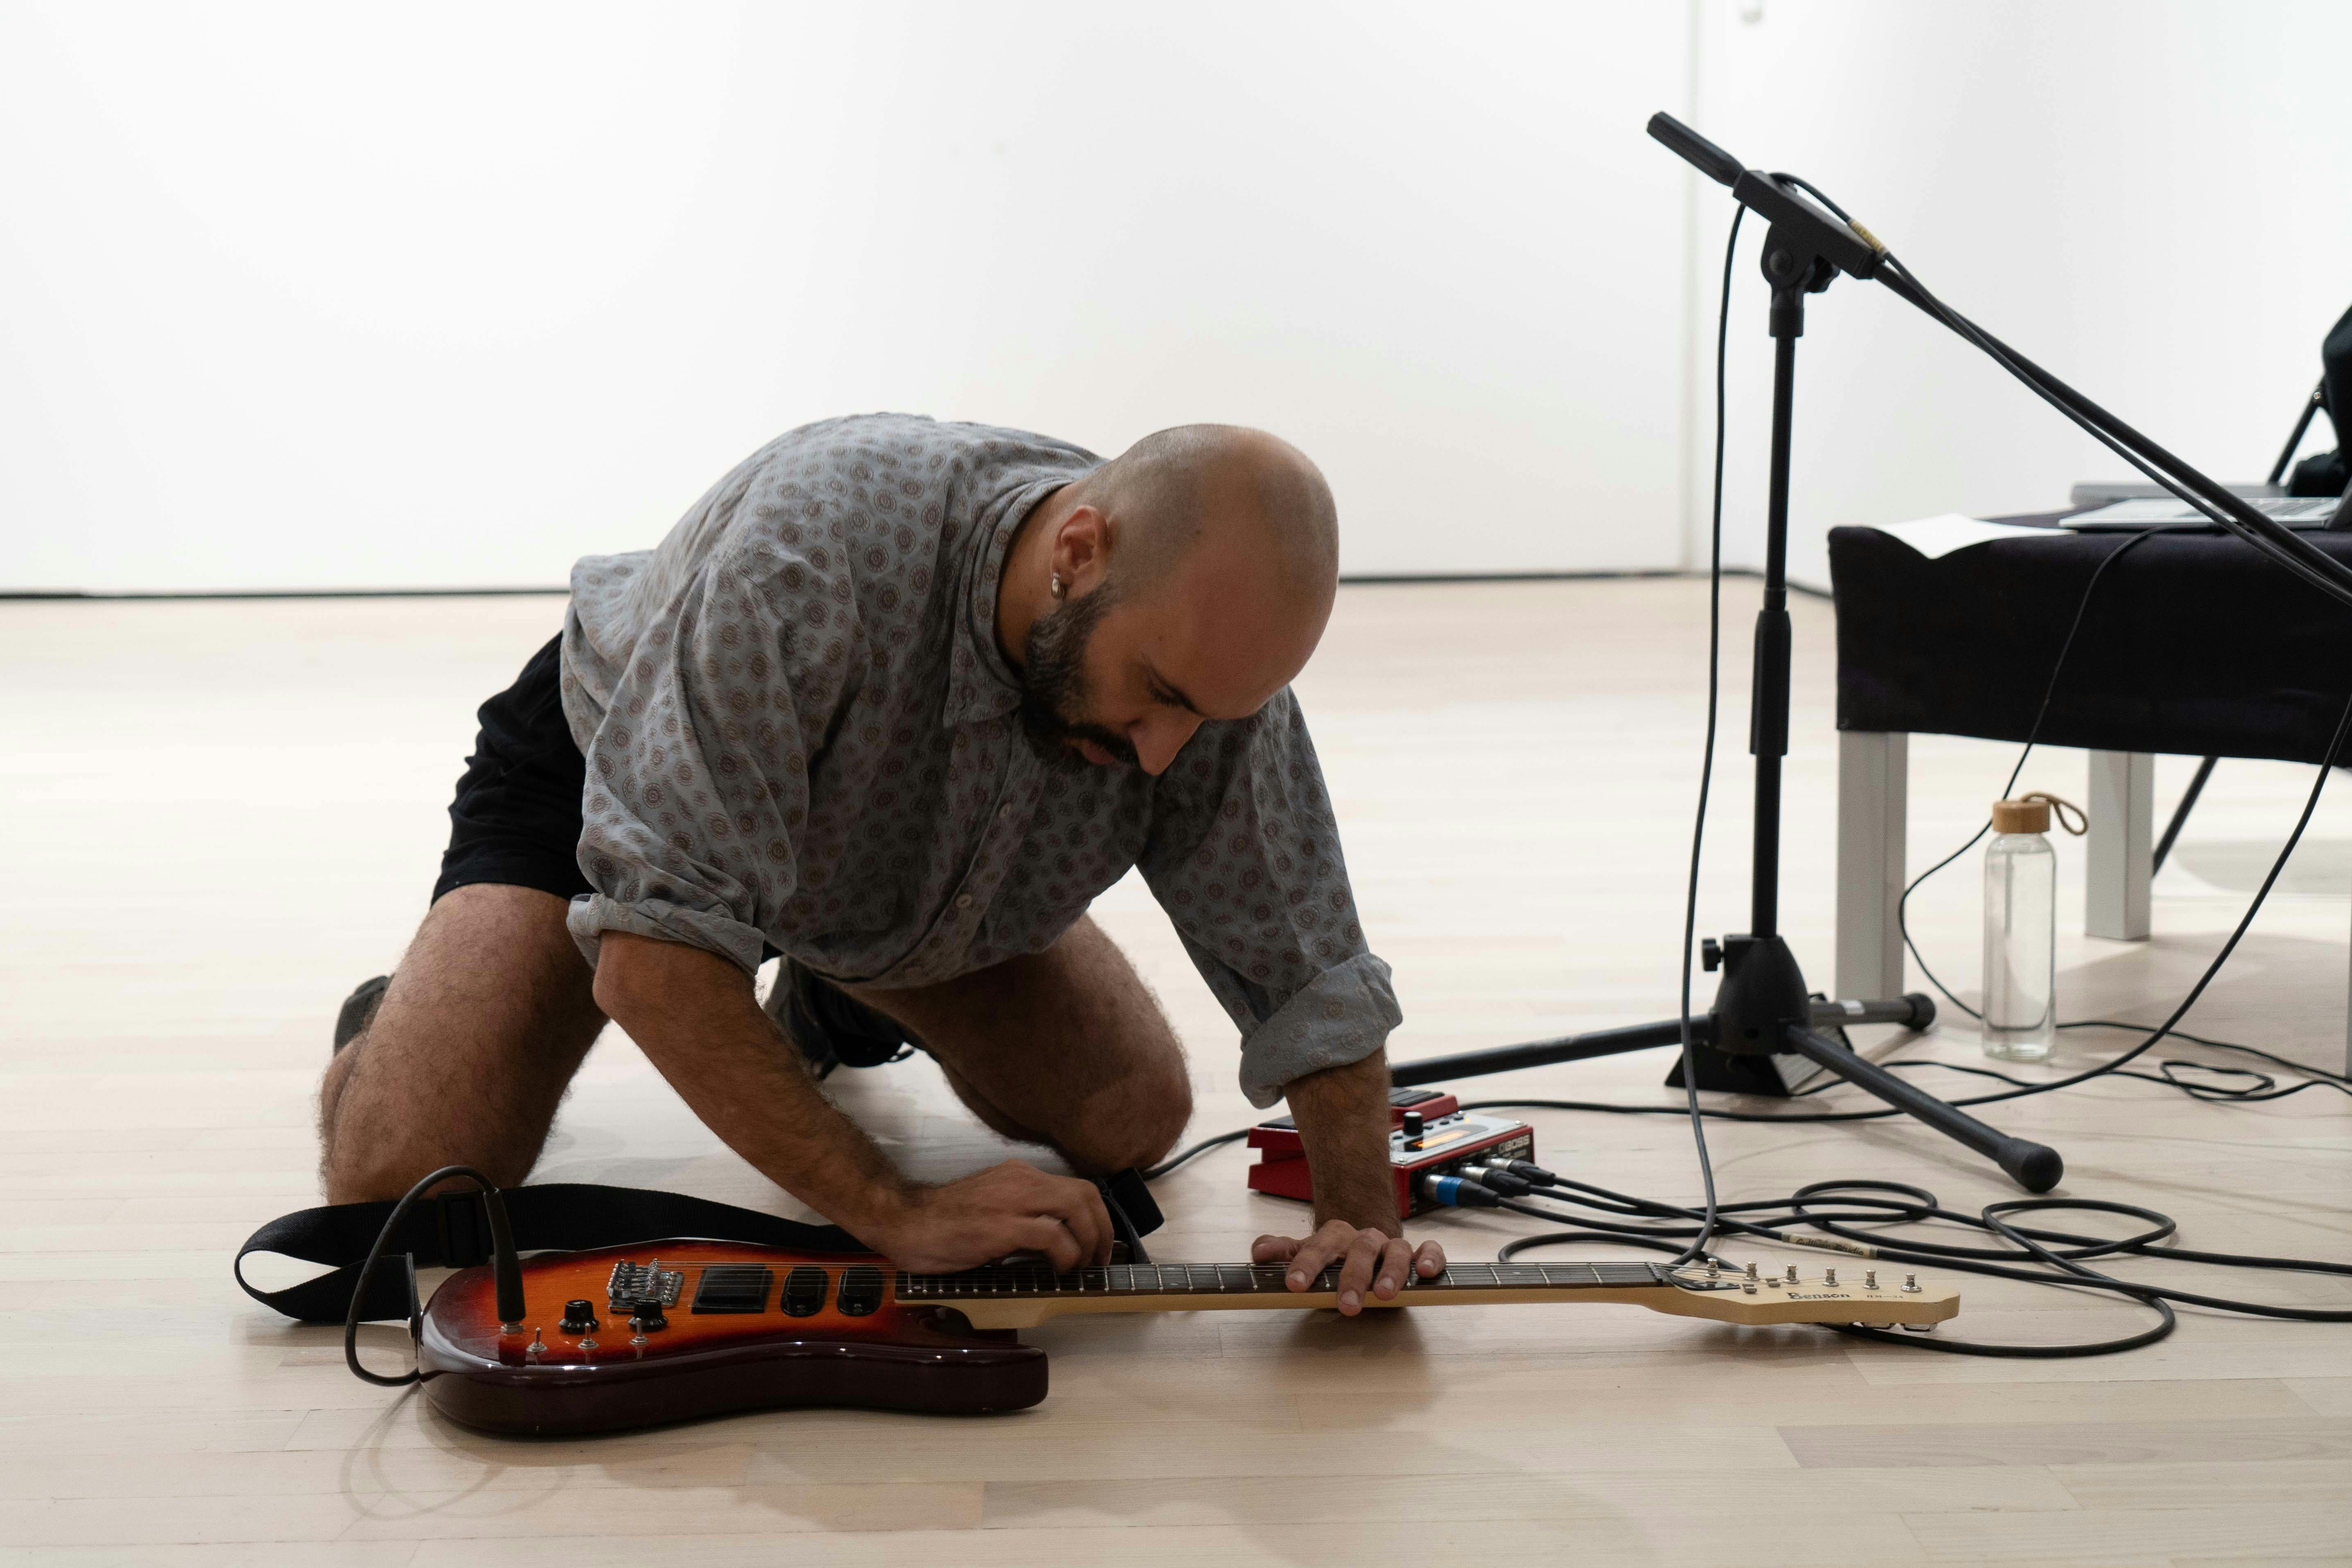 Daniele Ninarello, kneeled, plays an electric guitar laid on the ground. Next to him there are a black table and a microphone stand.